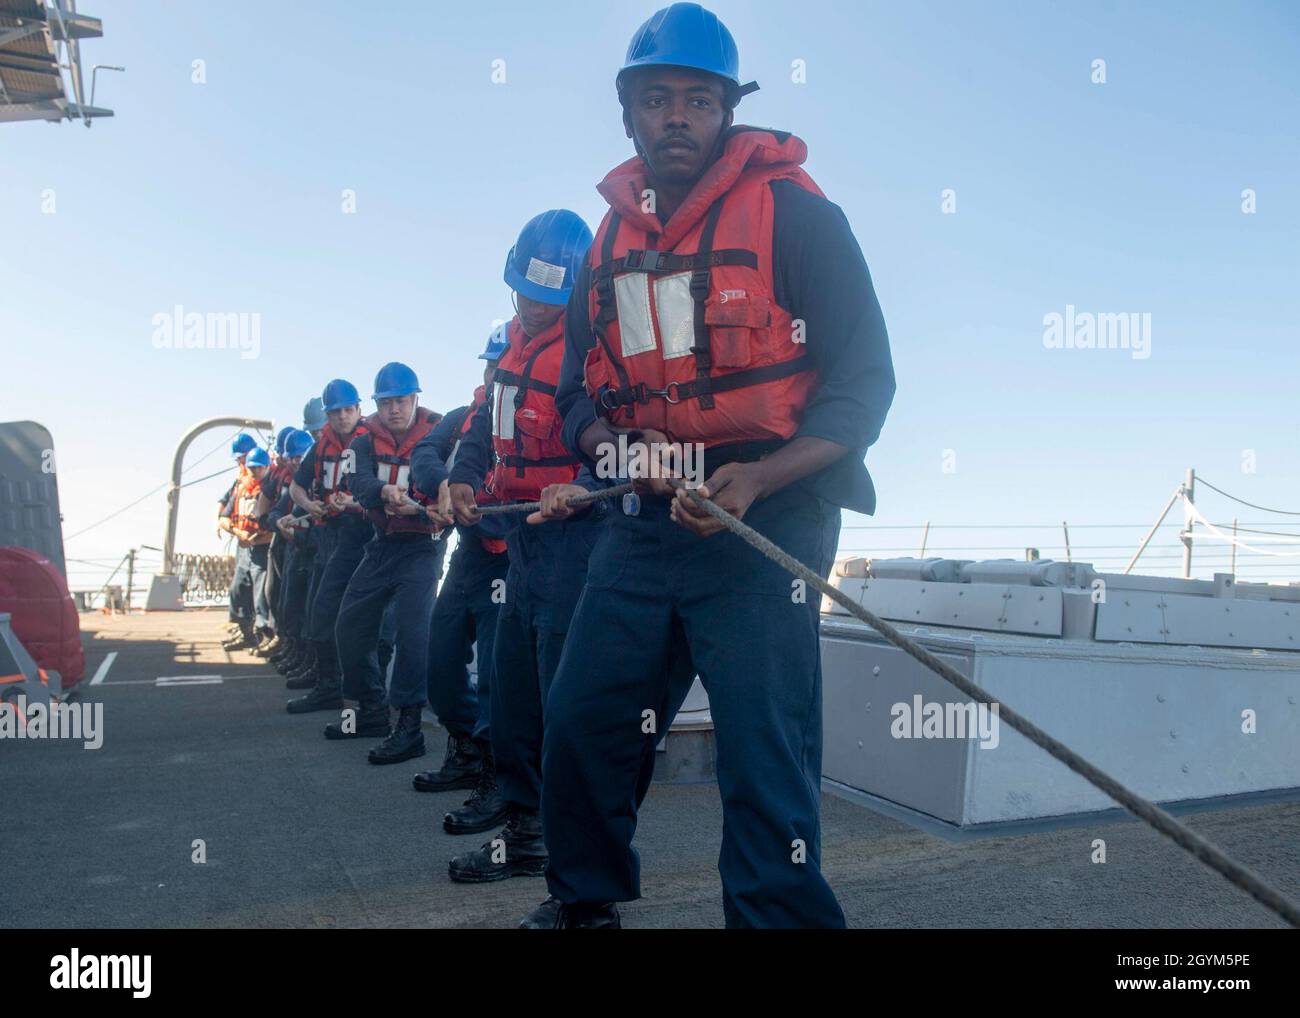 PACIFIC OCEAN (Jan. 27, 2020) Sailors aboard the Arleigh Burke-class guided-missile destroyer USS Paul Hamilton (DDG 60) heave a line during a replenishment-at-sea with the Military Sealift Command fast combat support ship USNS Arctic (T-AO 8) Jan. 27, 2020.  Paul Hamilton, part of the Theodore Roosevelt Carrier Strike Group, is on a scheduled deployment to the Indo-Pacific. (U.S. Navy photo by Mass Communication Specialist 3rd Class Matthew F. Jackson) Stock Photo